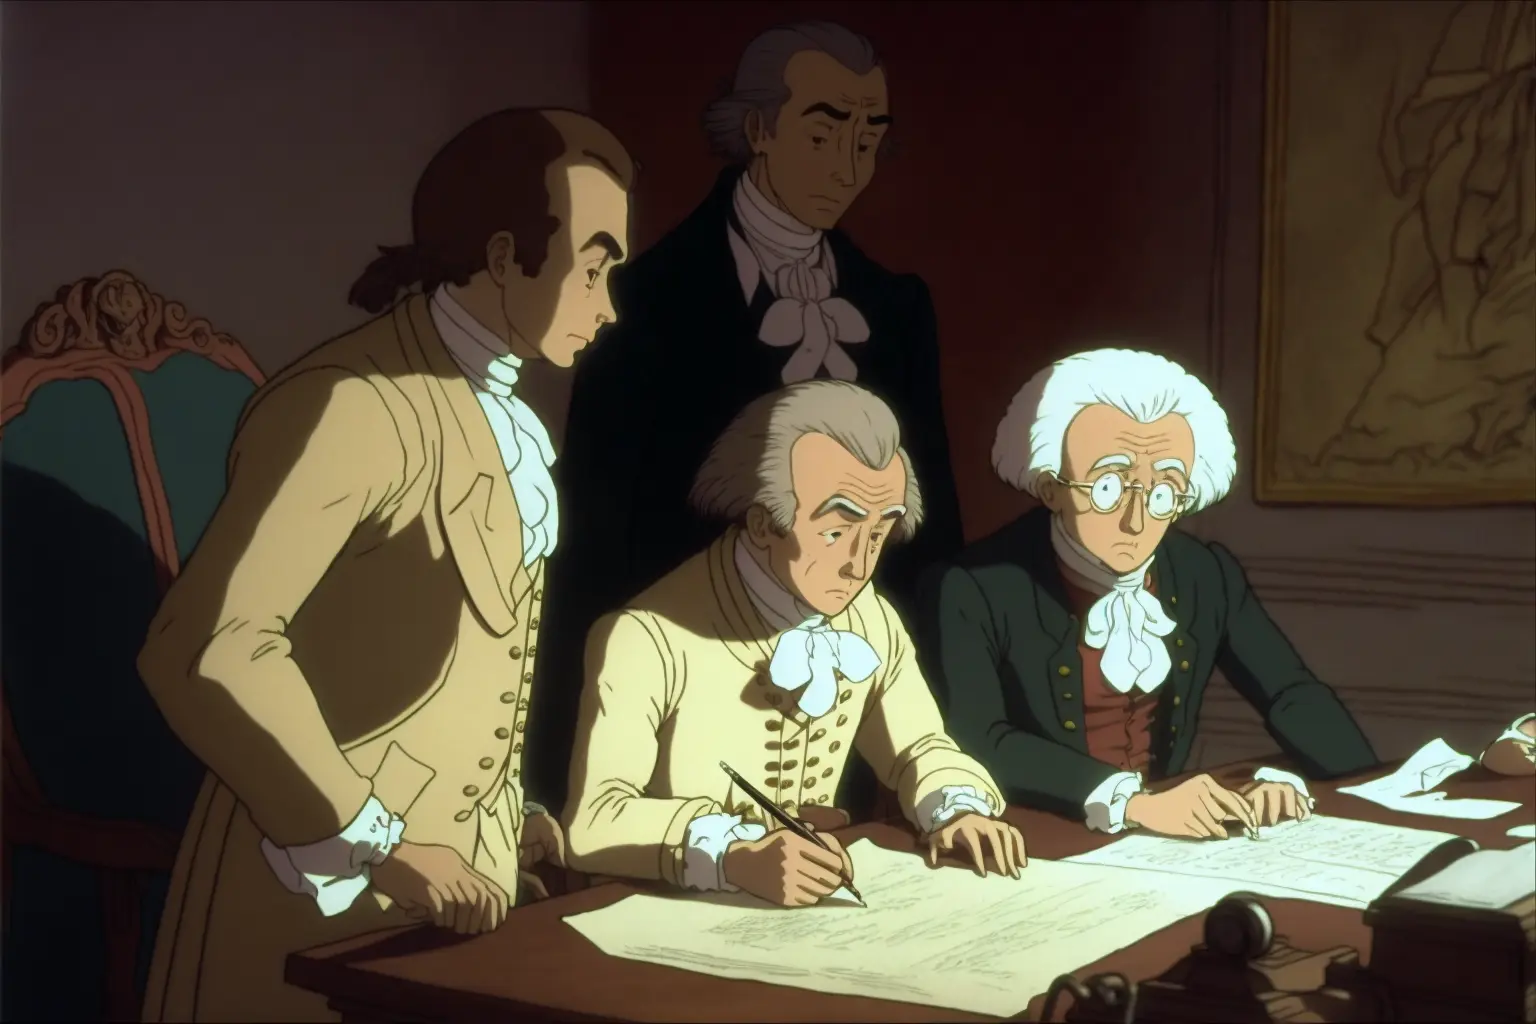 DVD screengrab from studio ghibli movie, the founding fathers signing the declaration of independence, directed by Hayao Miyazaki, retro anime